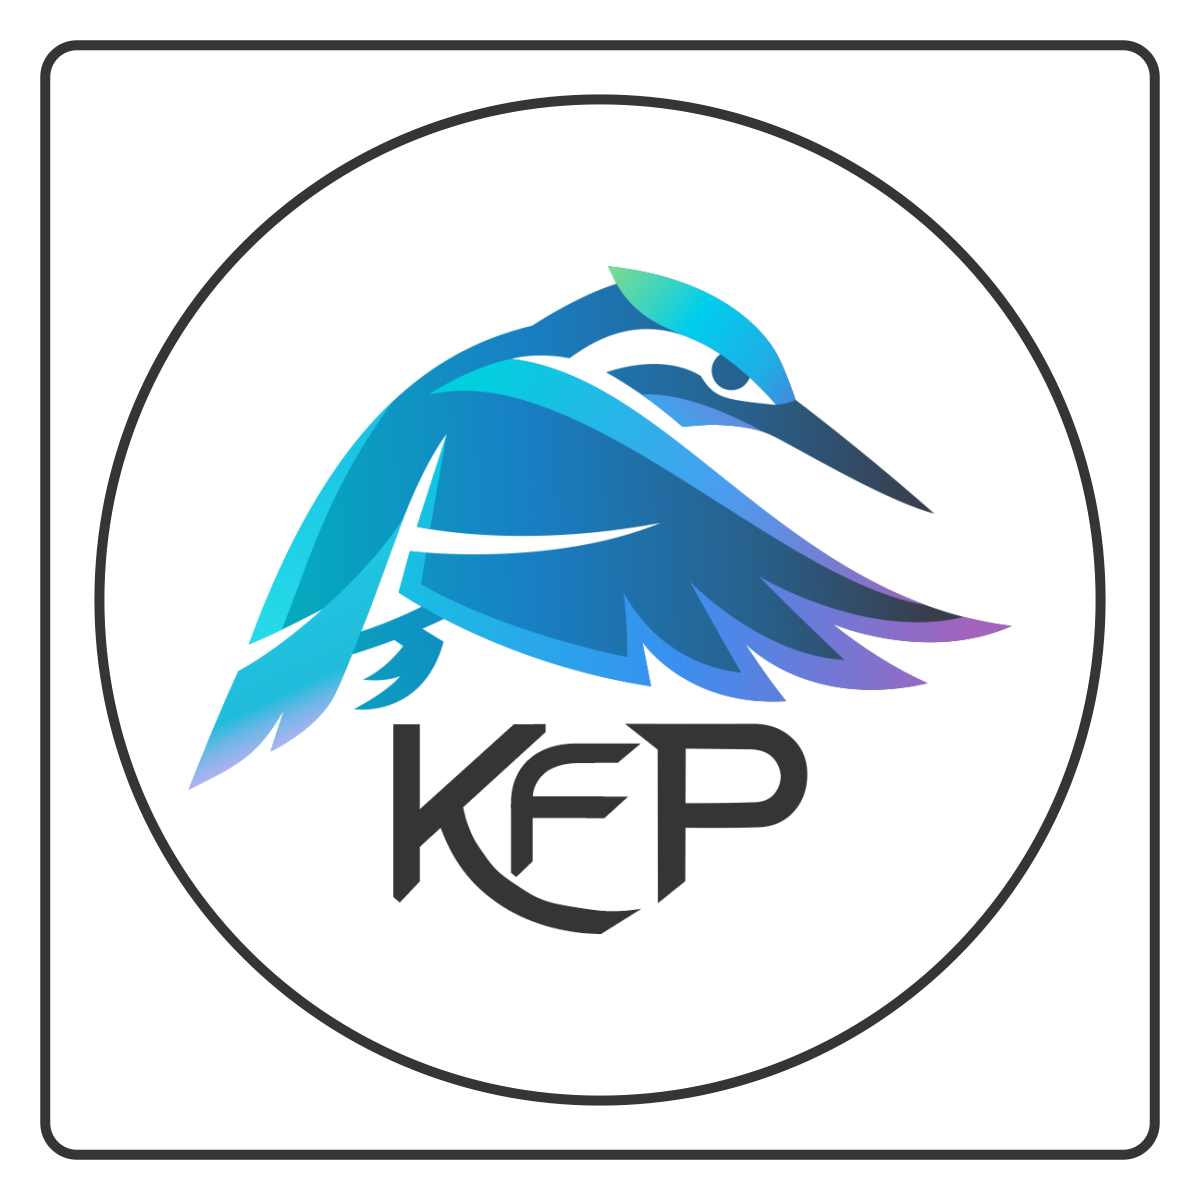 KFP sticker sheet showing a round sticker type on a square cut backer